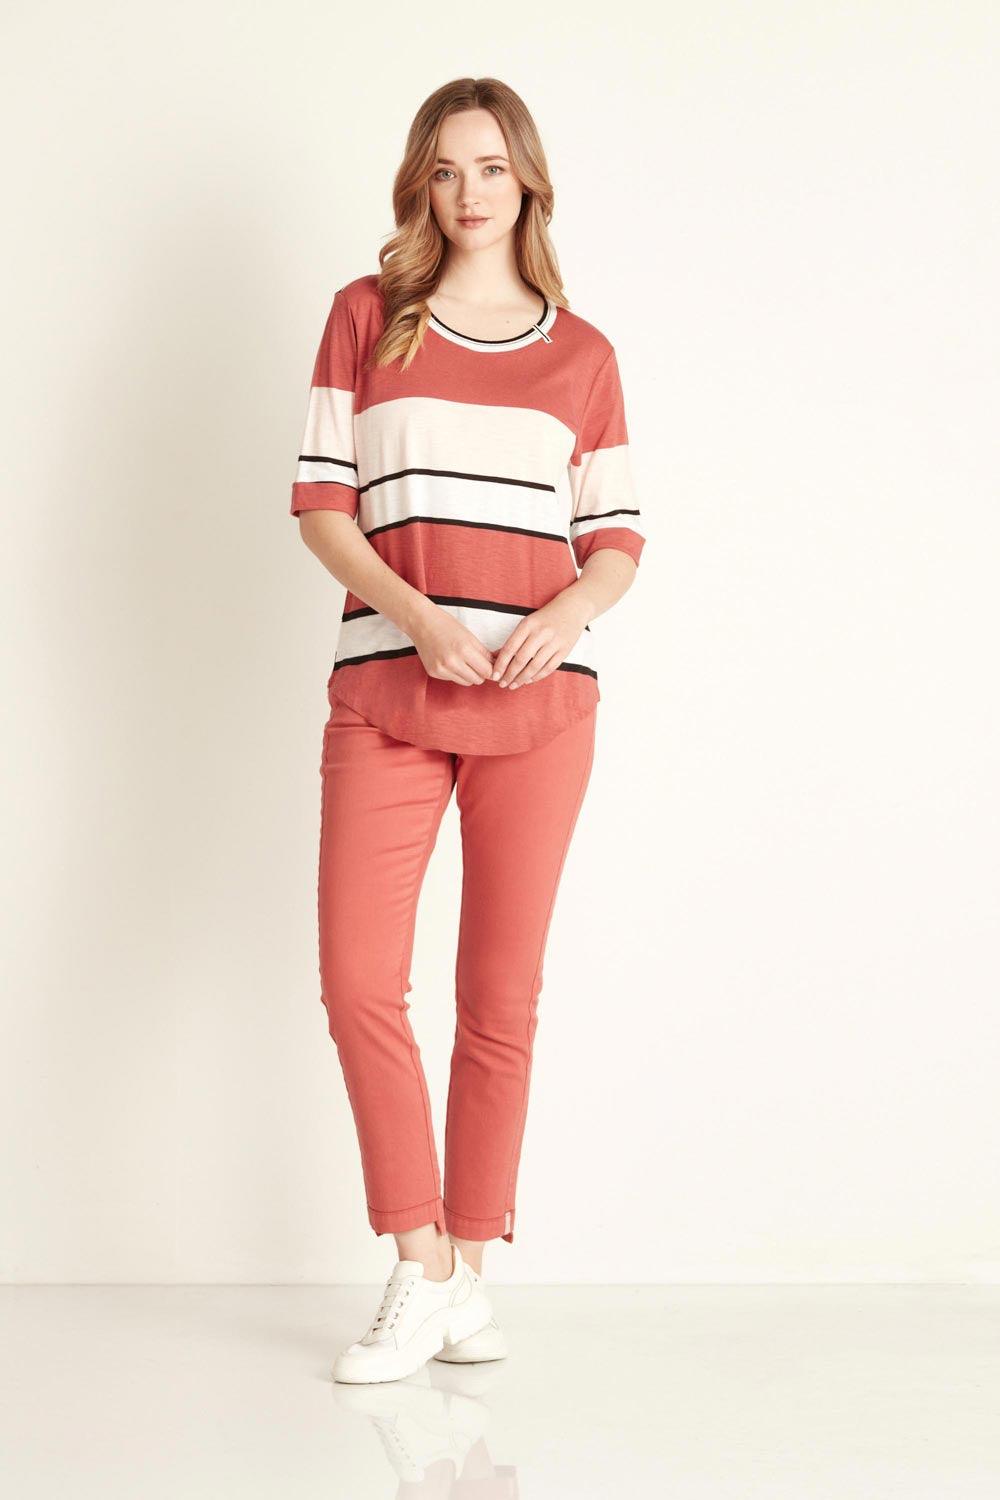 Always Top - Washed Red/Pretty Pink - Tee VERGE